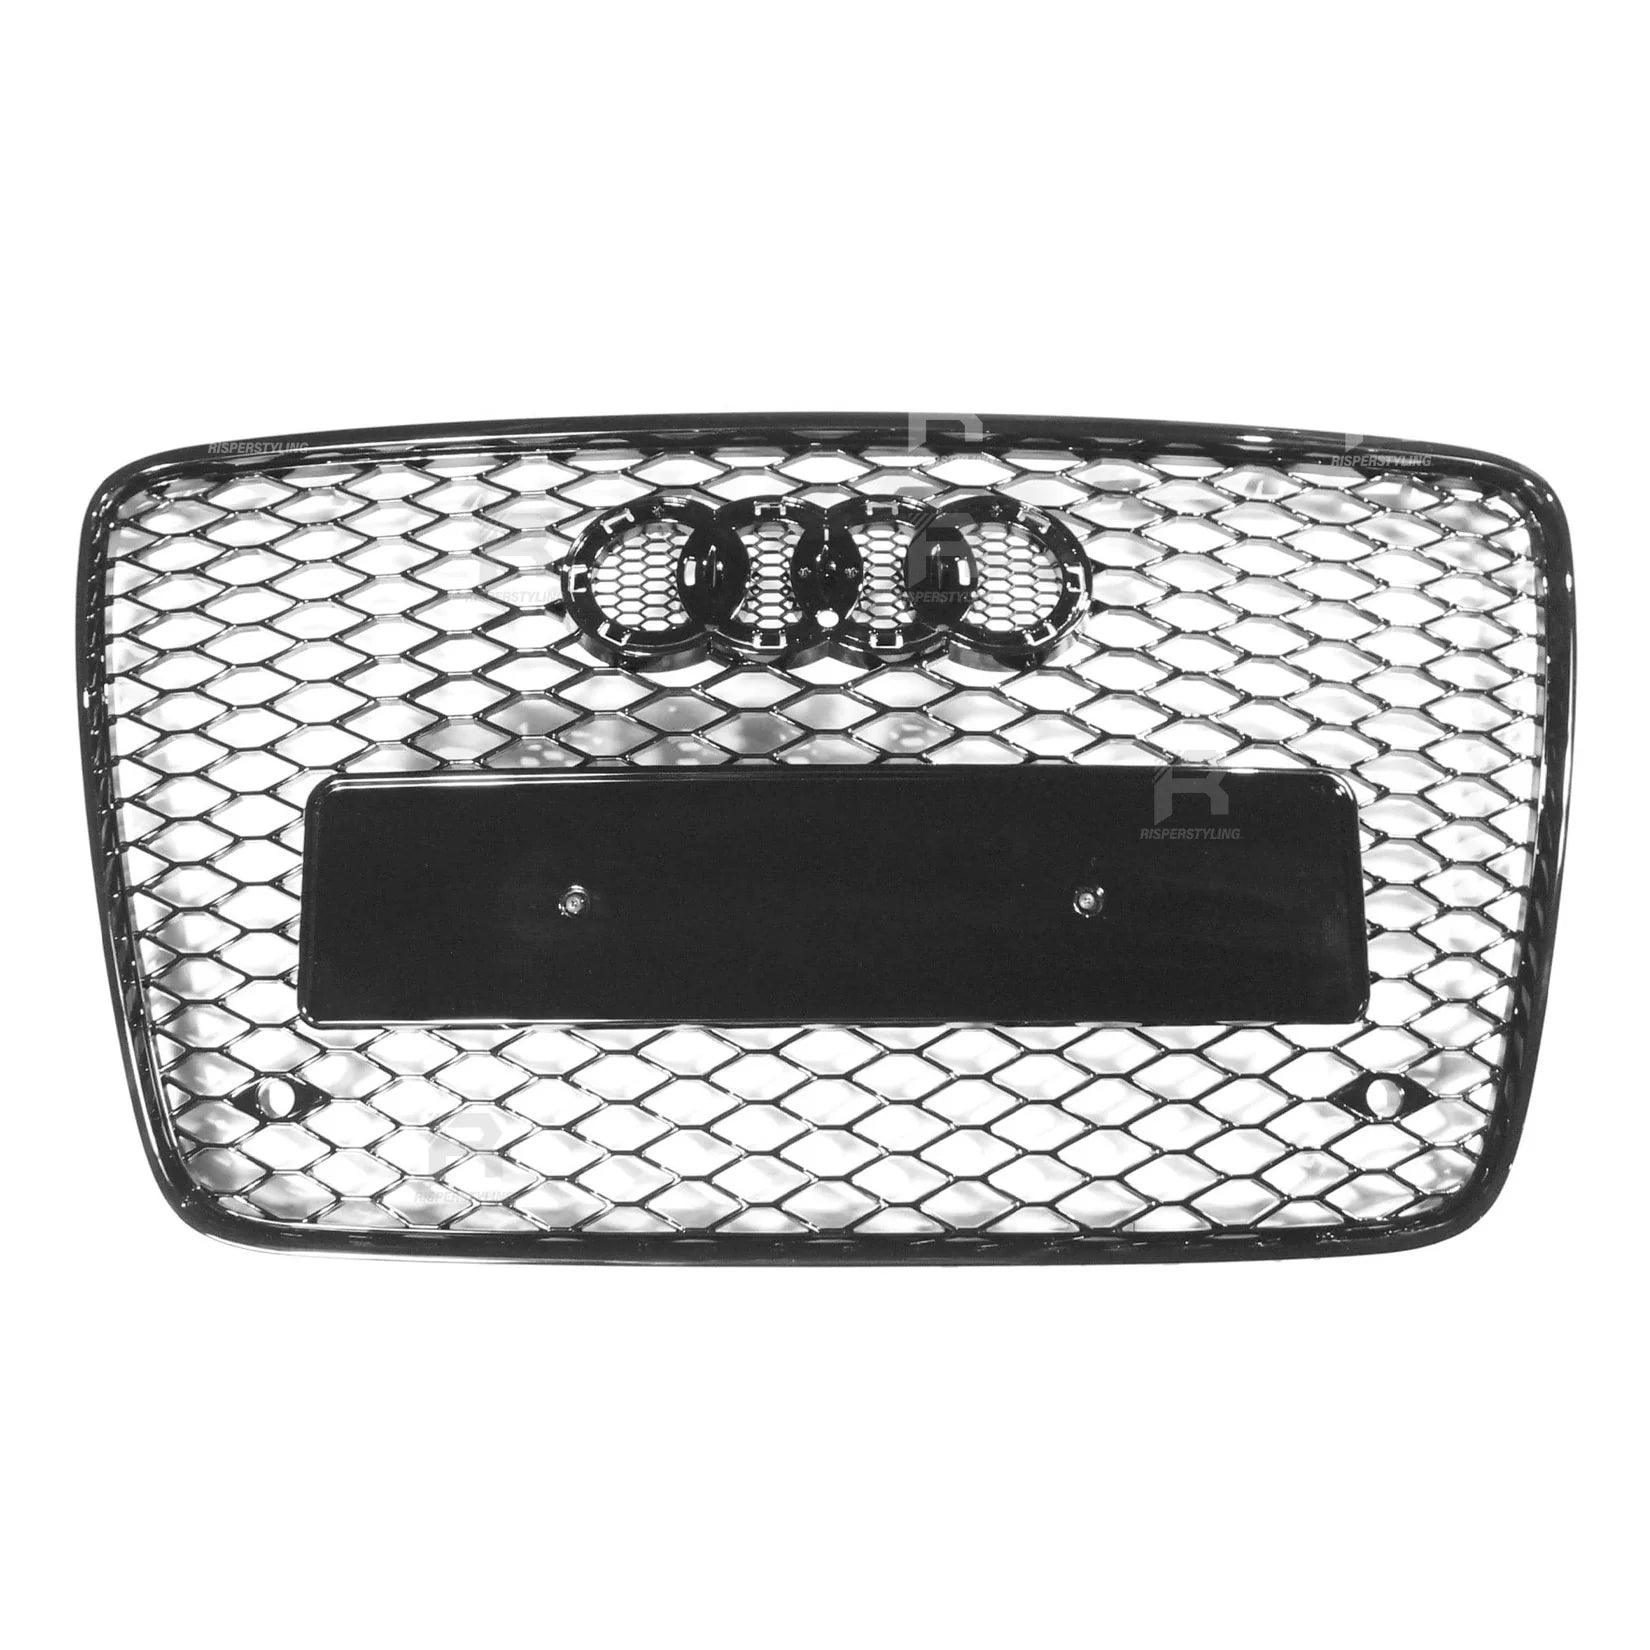 AUDI Q7 2006-2014 'RSQ7 STYLE' HONEYCOMB GRILL IN ALL GLOSS BLACK - Storm Xccessories